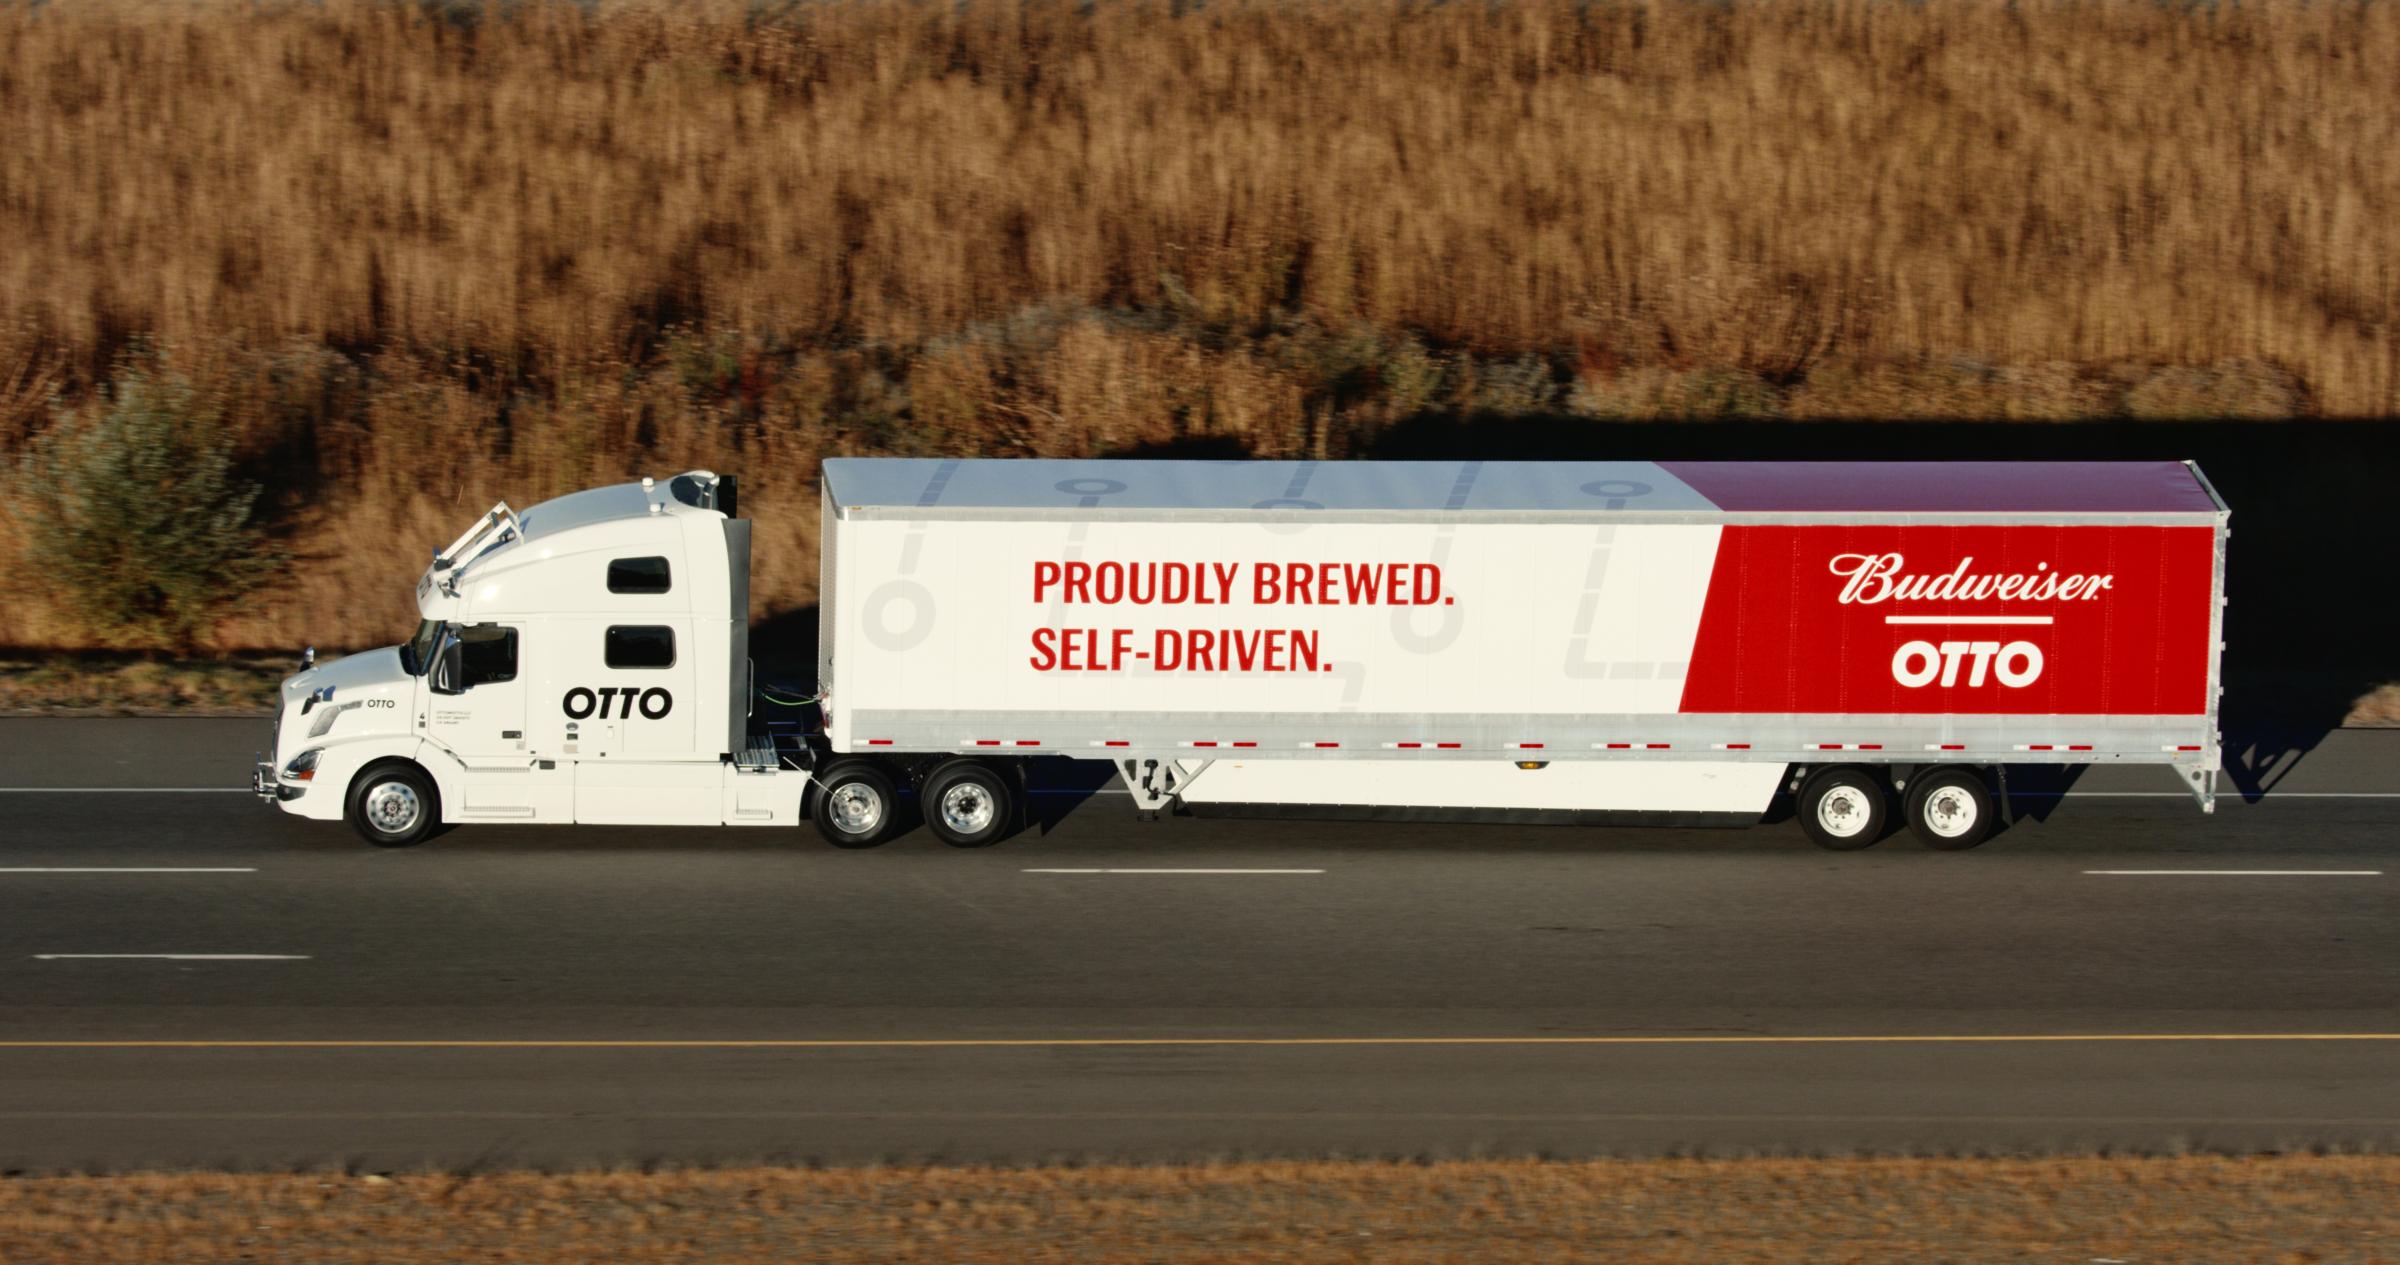 Otto Self-Driving Beer Delivery